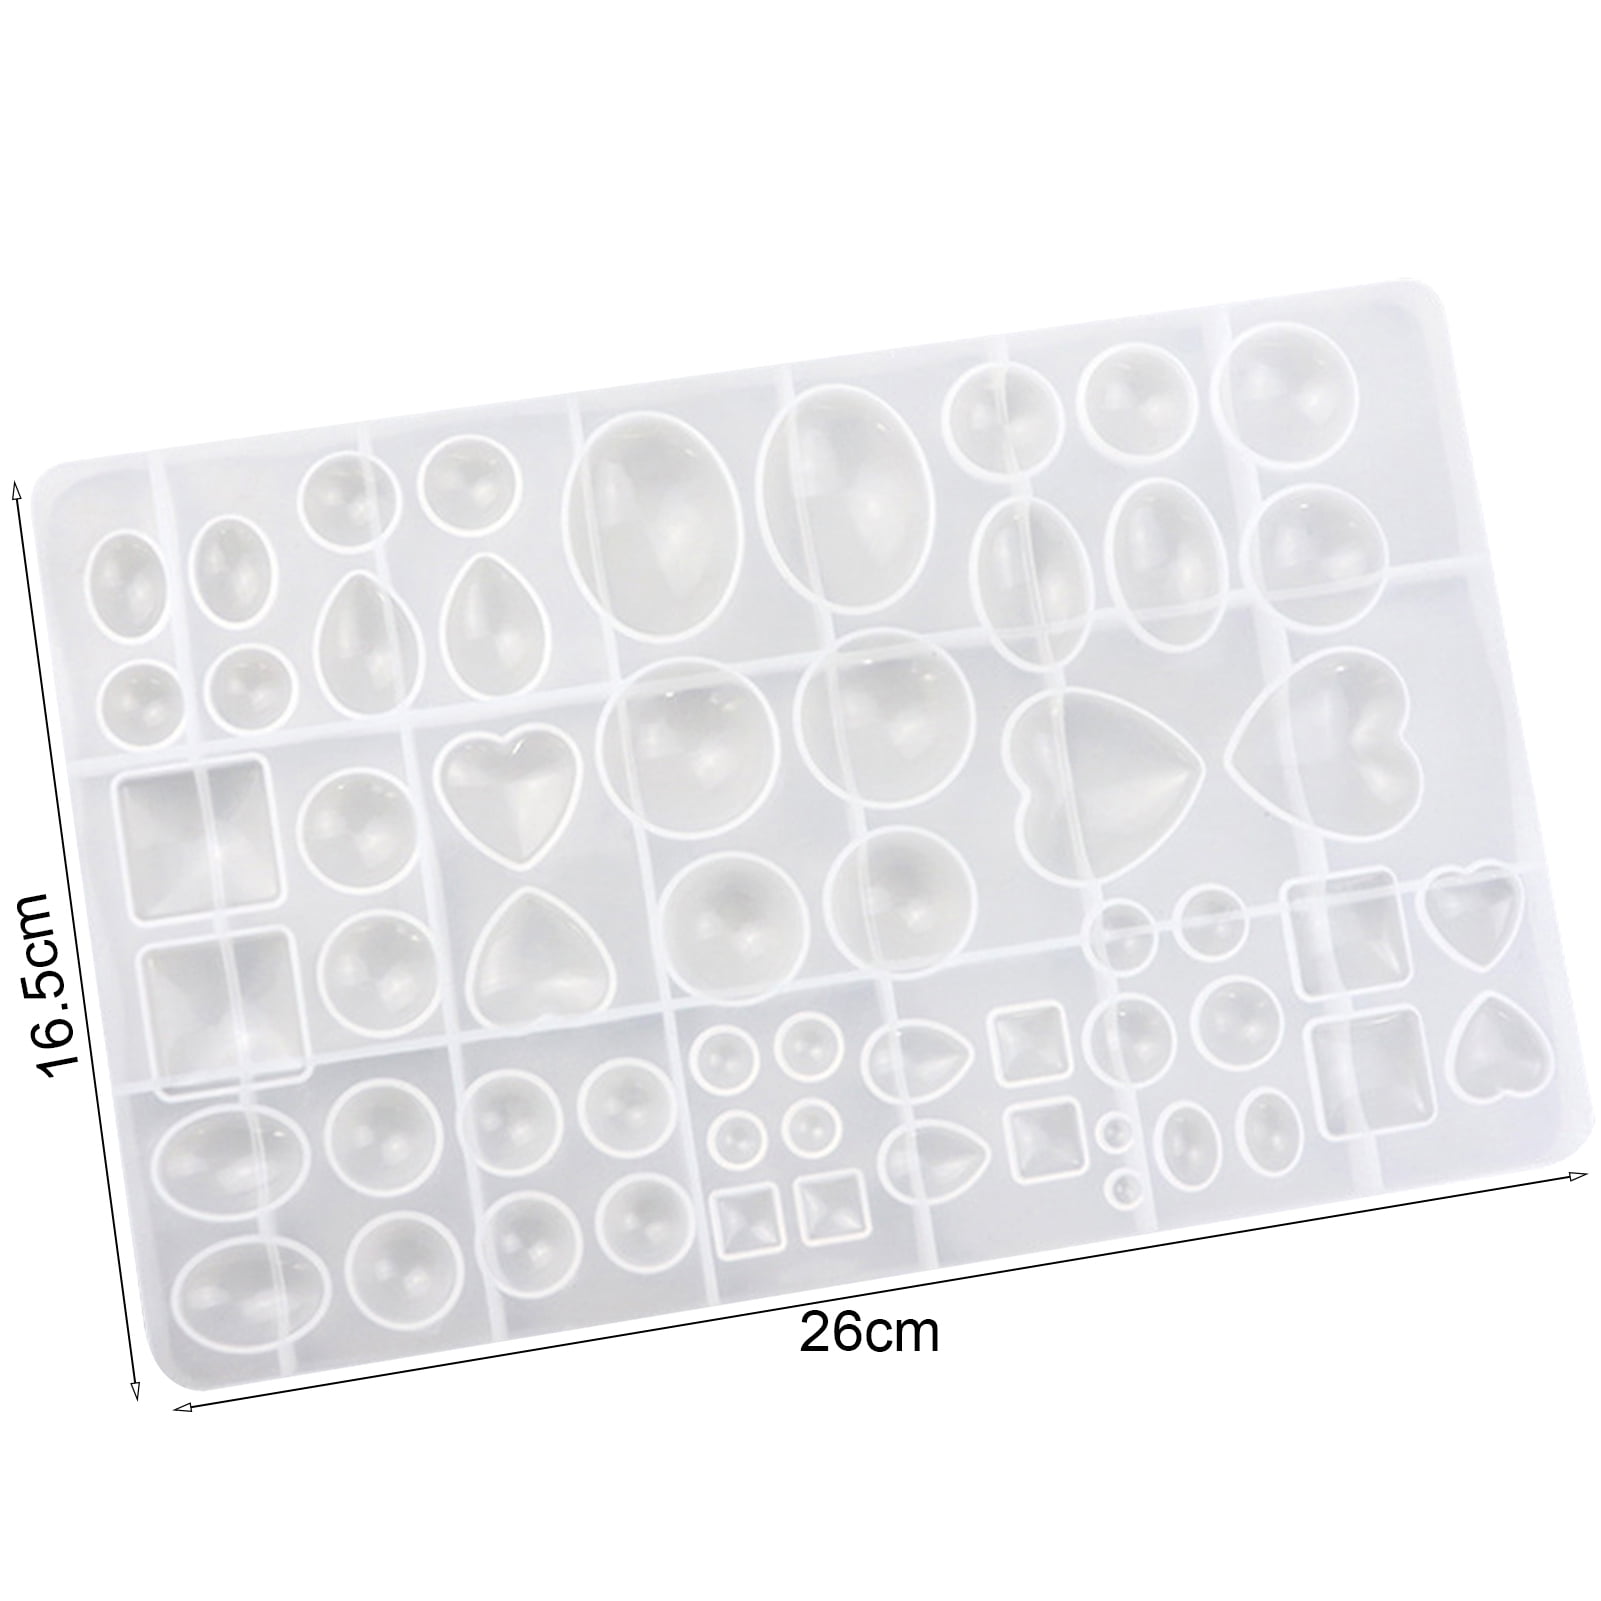 Cheers US Resin Molds Silicone Mold Silicone Resin Molds Resin Epoxy  Casting Molds for Casting Resin Dried Flowers, UV Resin Epoxy, Candle, Wax,  Soap, Bowl Mat 